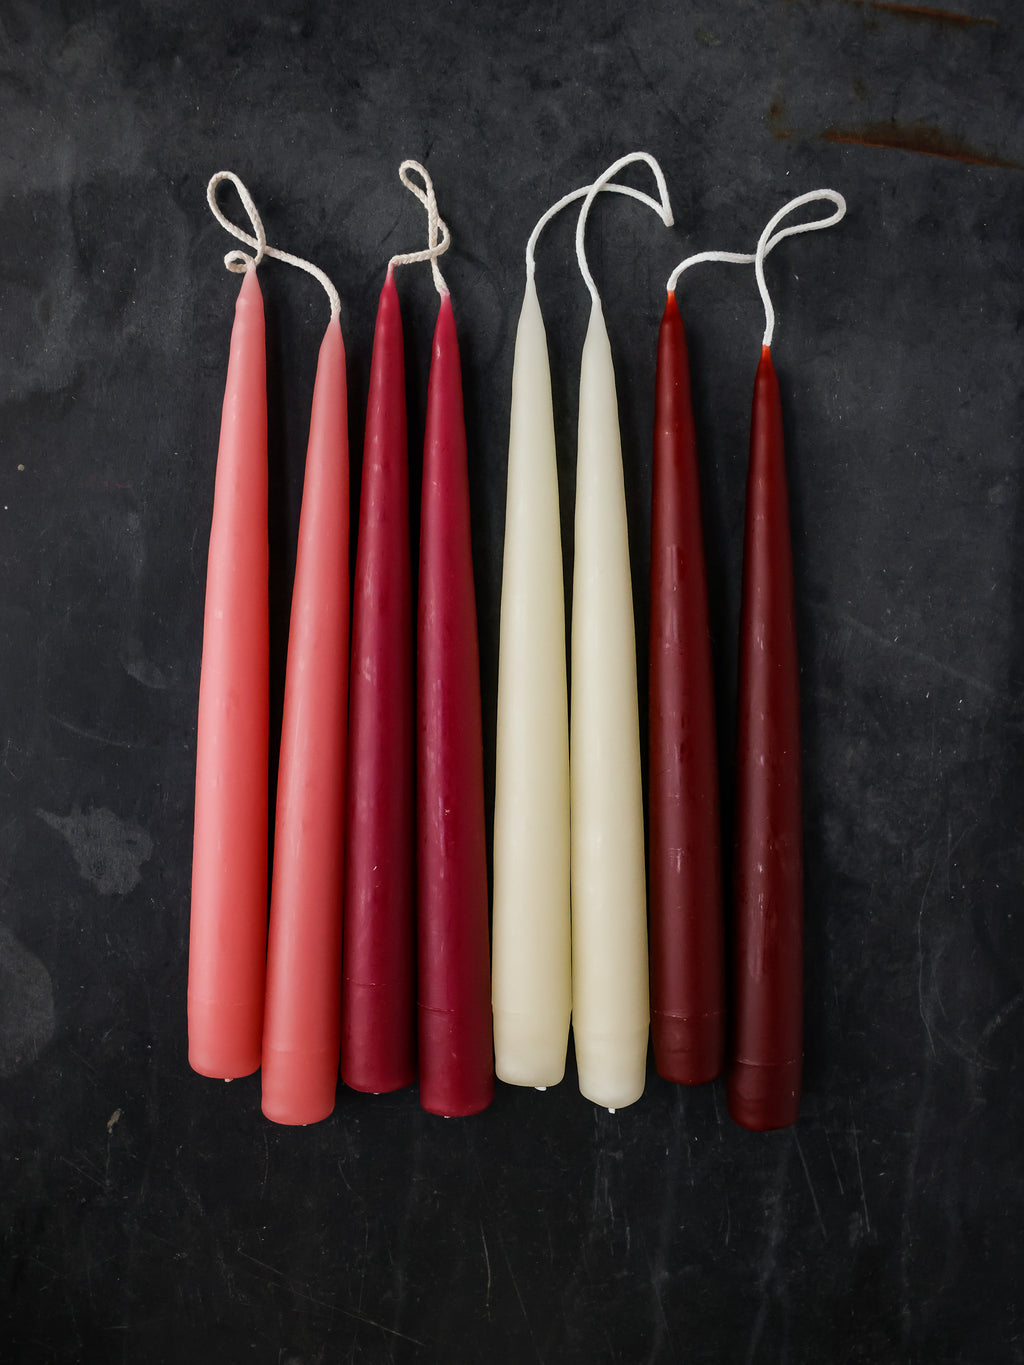 STICK-UM Candle Helper - in 2 sizes – The Lost Kitchen